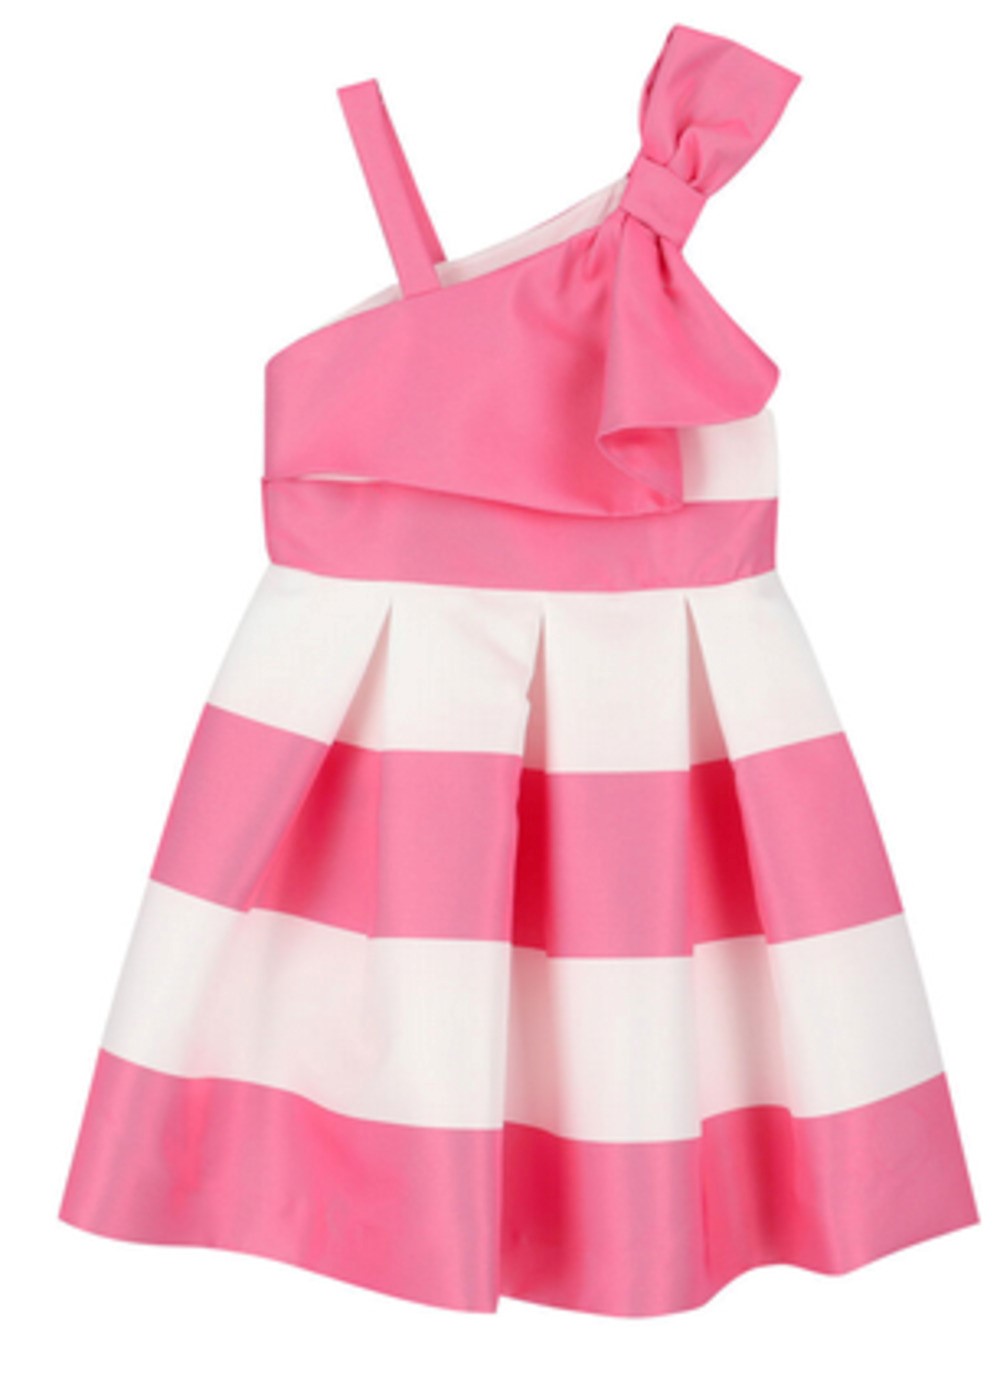 ABEL & LULA 5042 GIRLS PINK AND WHITE STRIPED DRESS WITH ASYMMETRICAL TOP AND BOW ACCENT ON SHOULDER